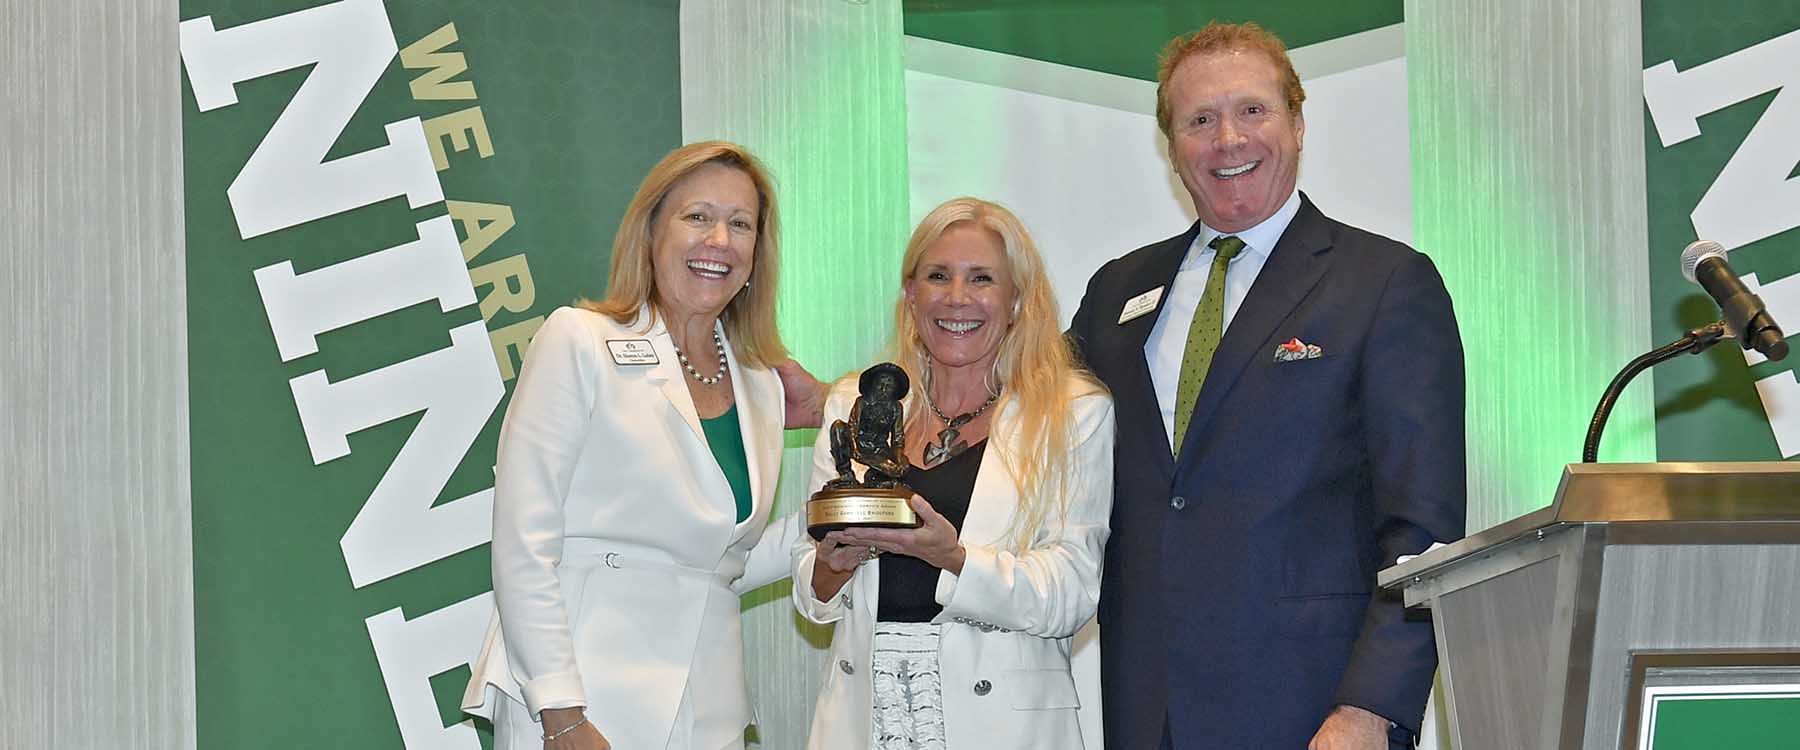 Sally Gambrell Bridgford, president of The Gambrell Foundation, is the 2021 recipient of the UNC Charlotte Distinguished Service Award.